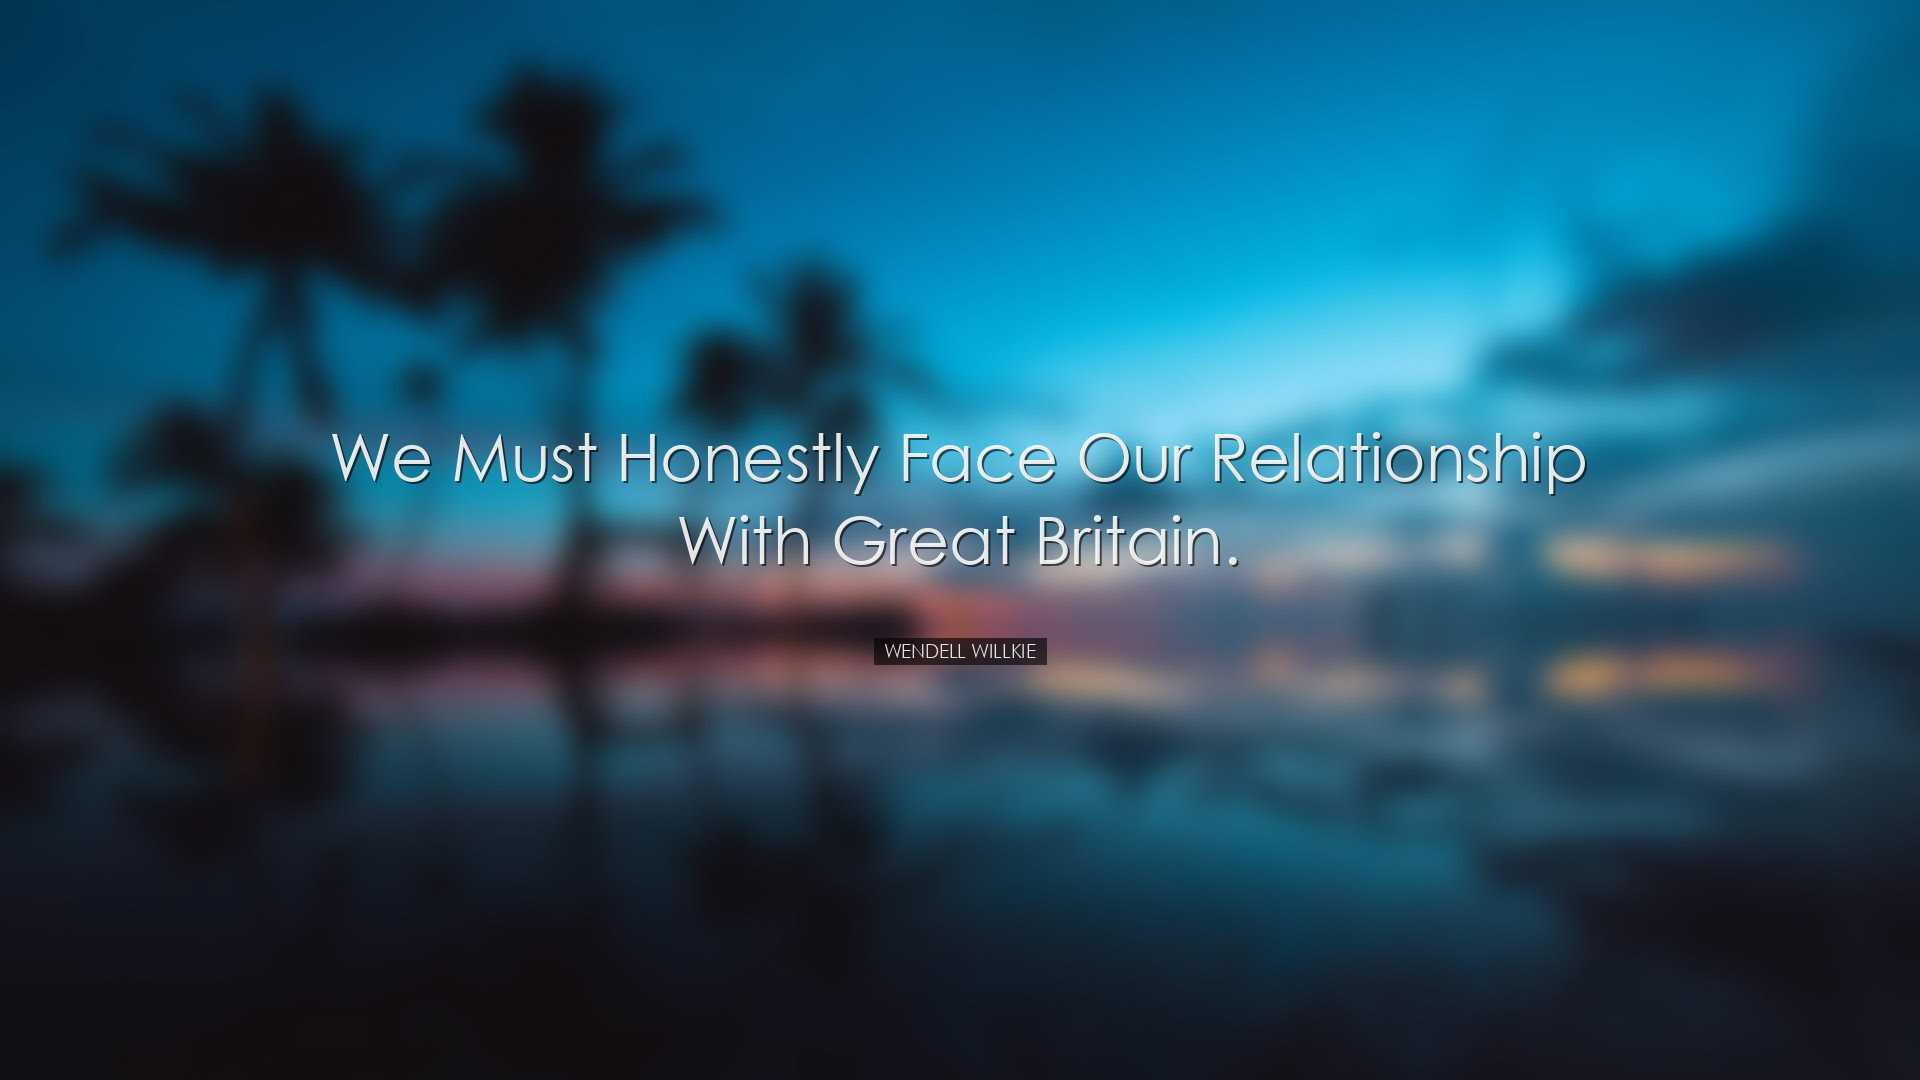 We must honestly face our relationship with Great Britain. - Wende